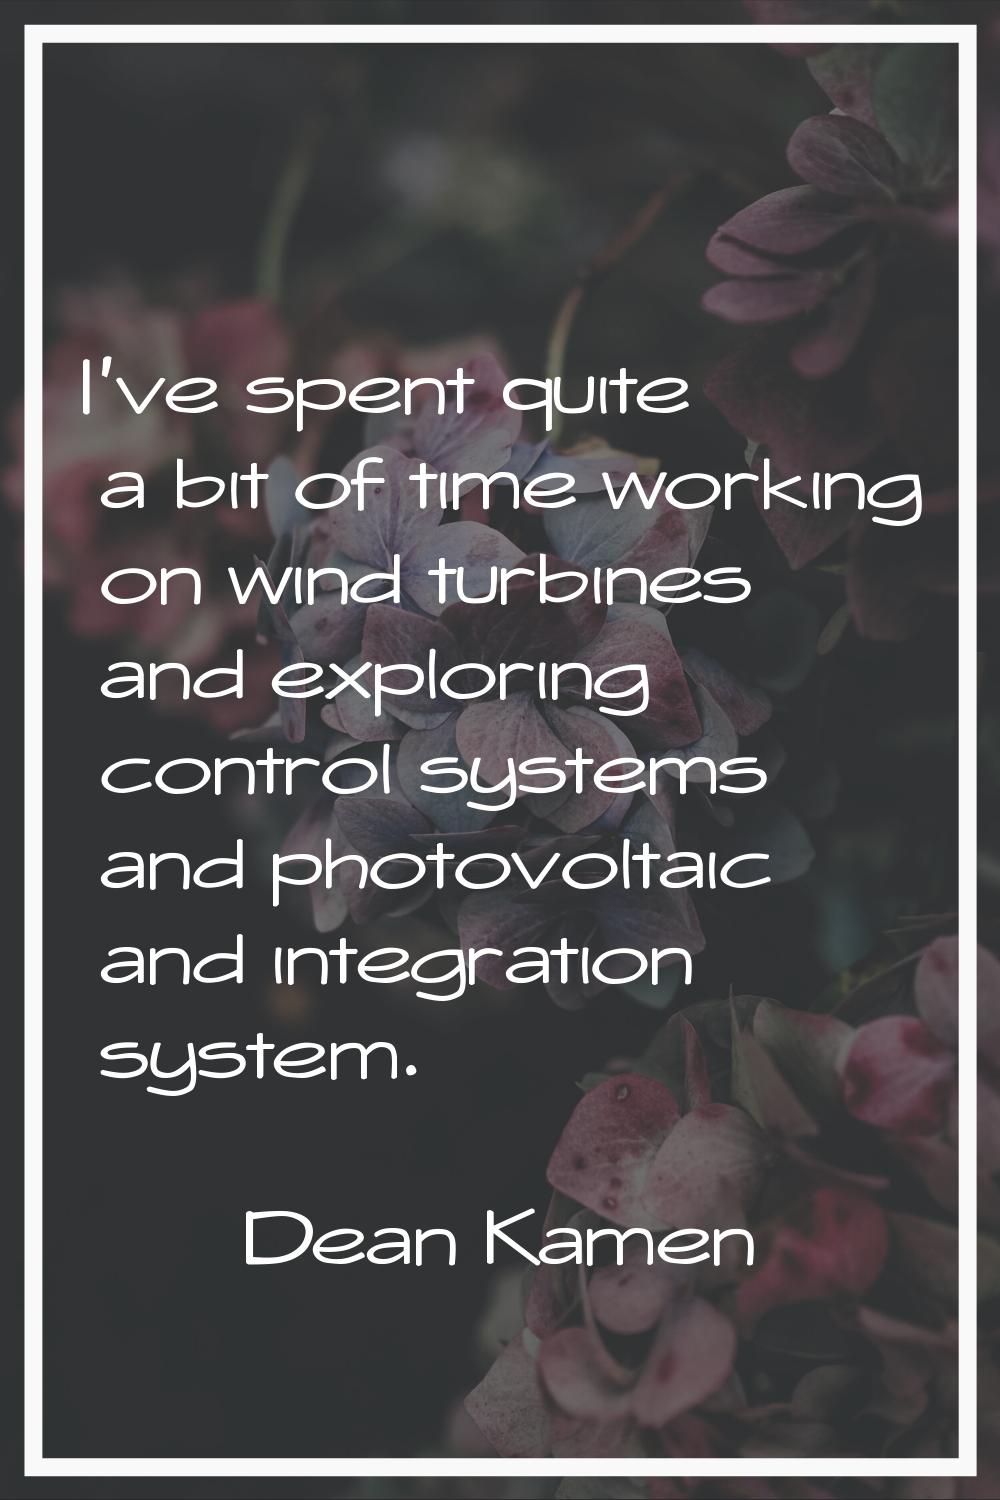 I've spent quite a bit of time working on wind turbines and exploring control systems and photovolt